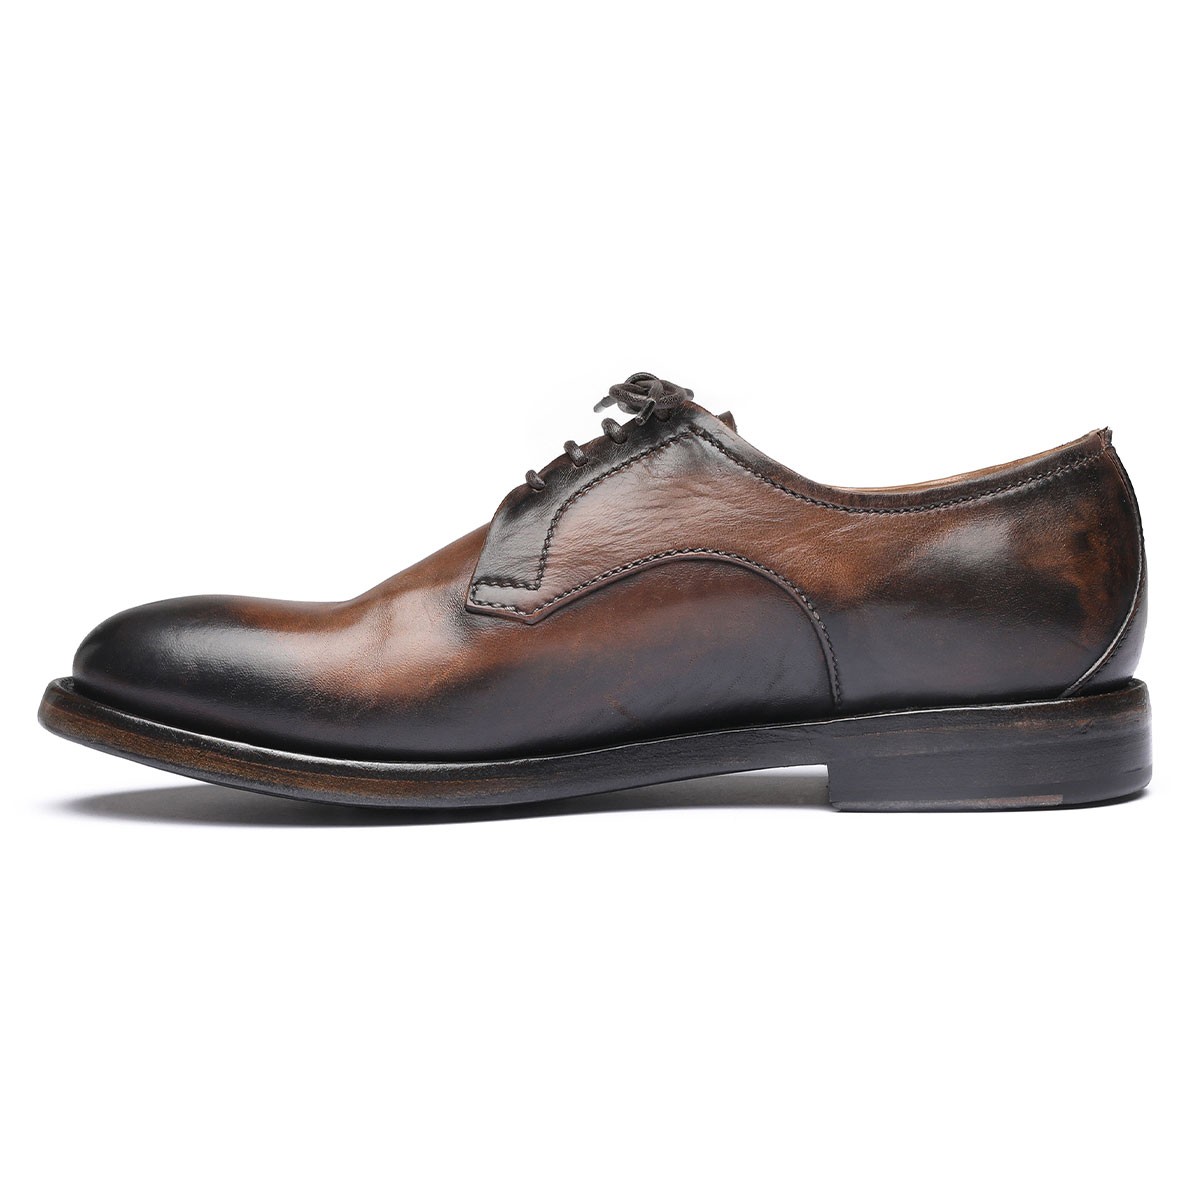 Brown leather Derby shoes